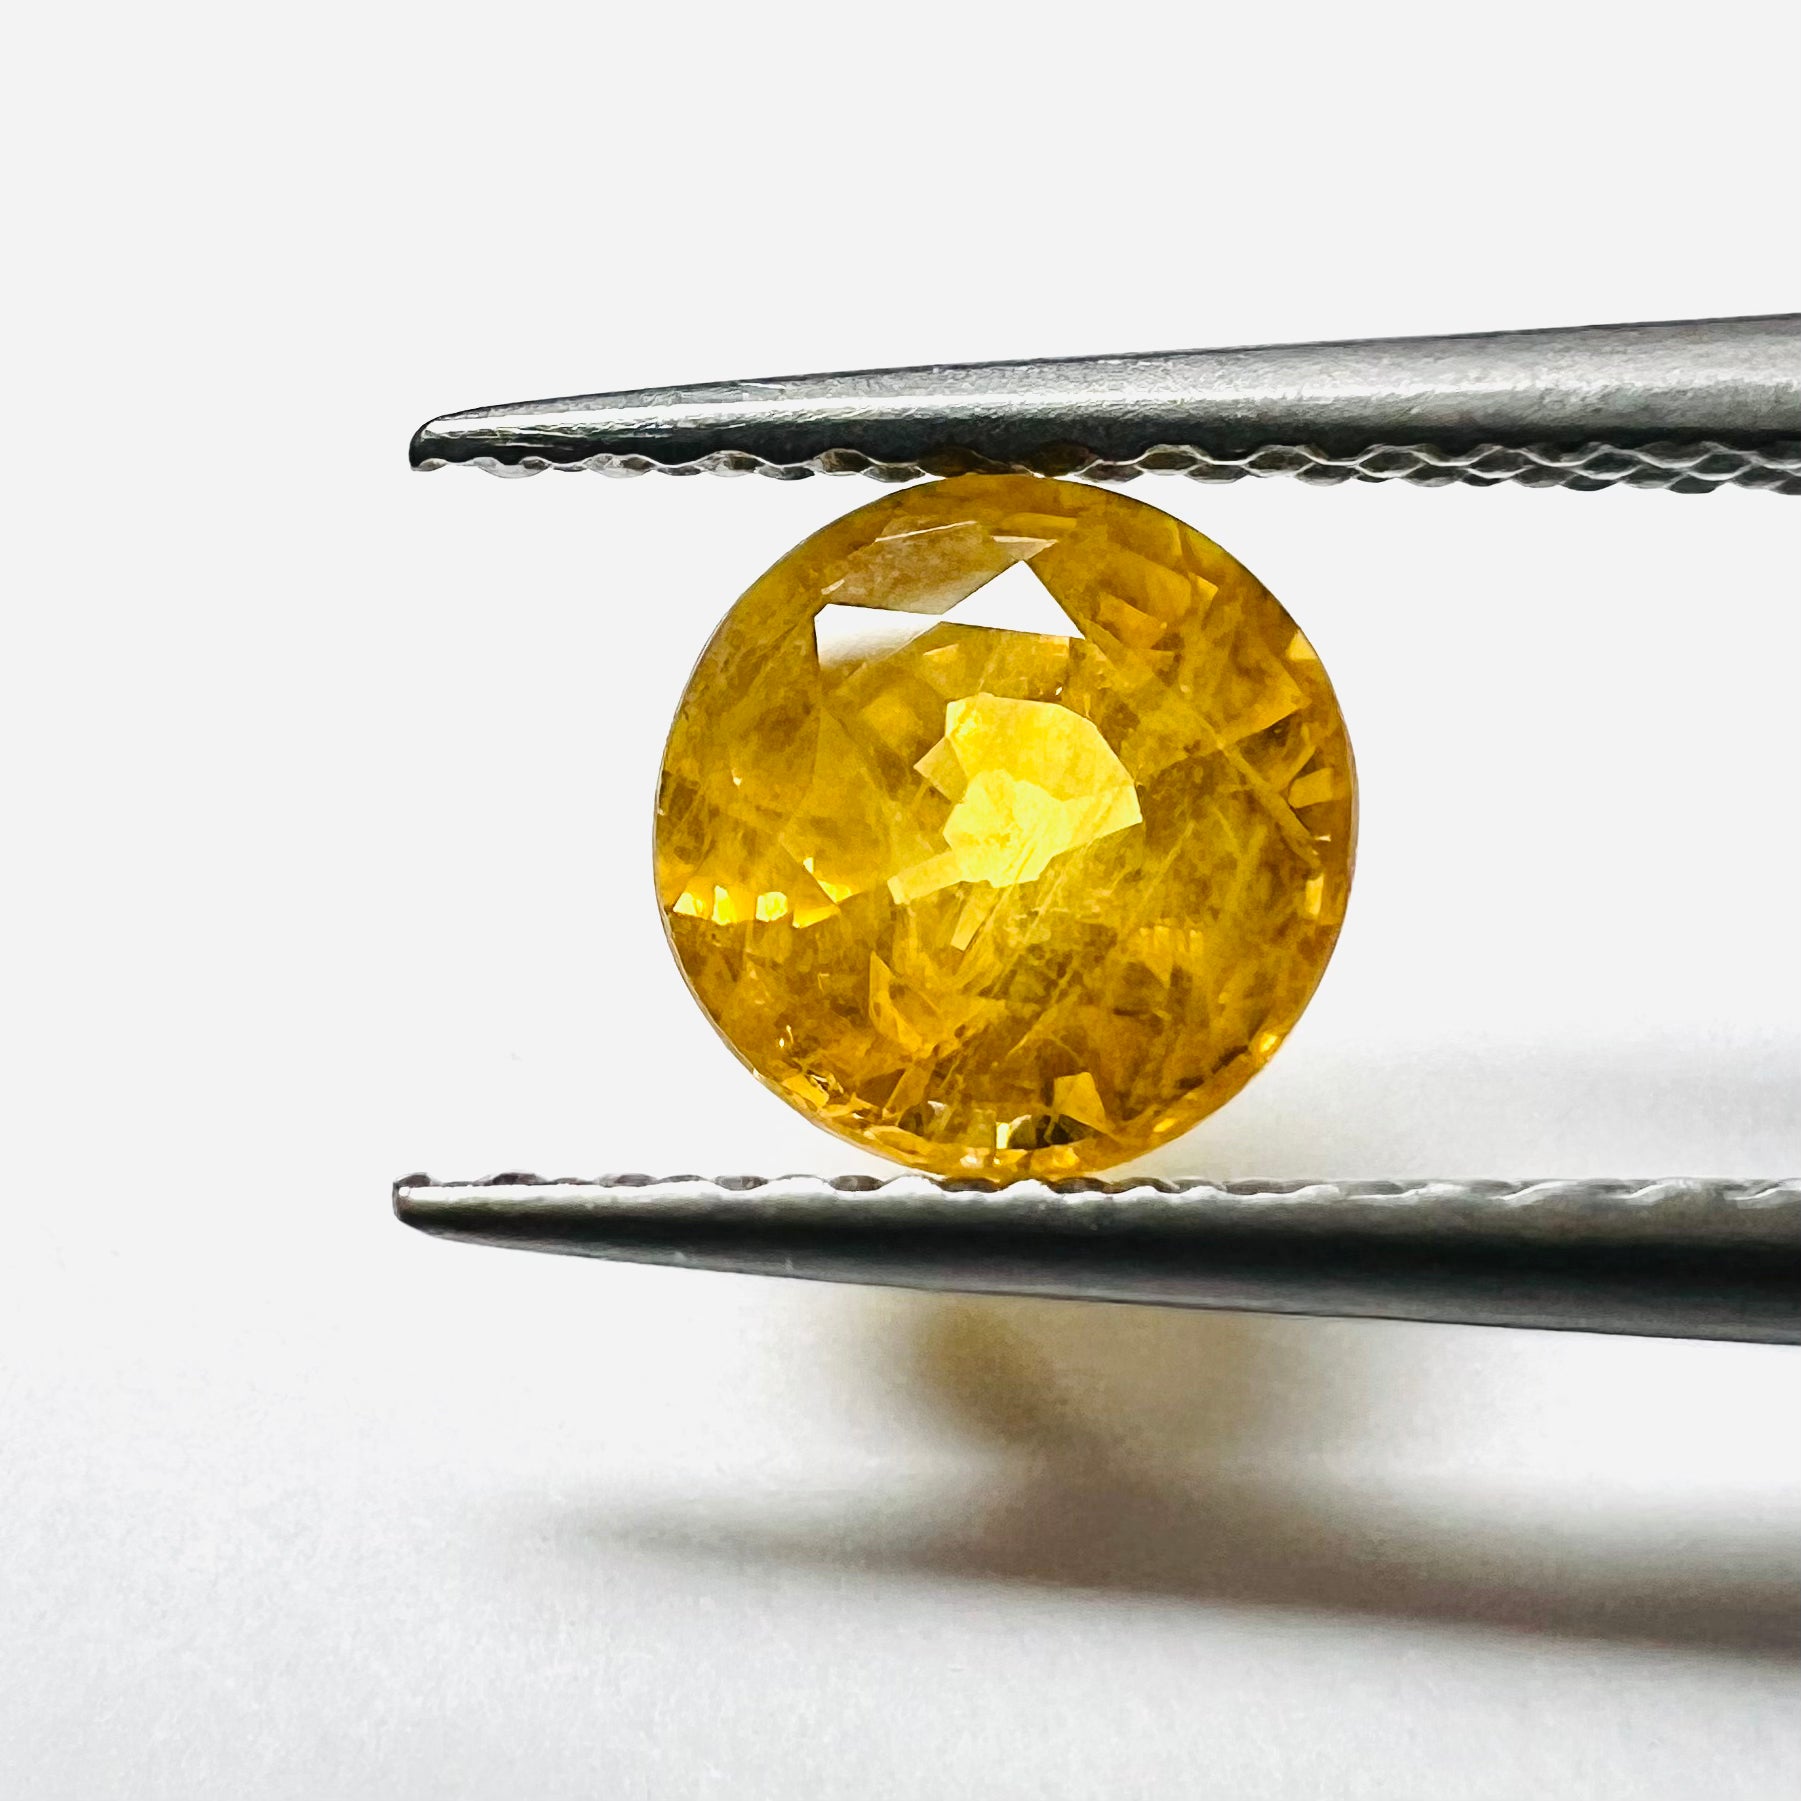 .90CTW Loose Round Yellow Sapphire 5.5x4.5mm Earth mined Gemstone